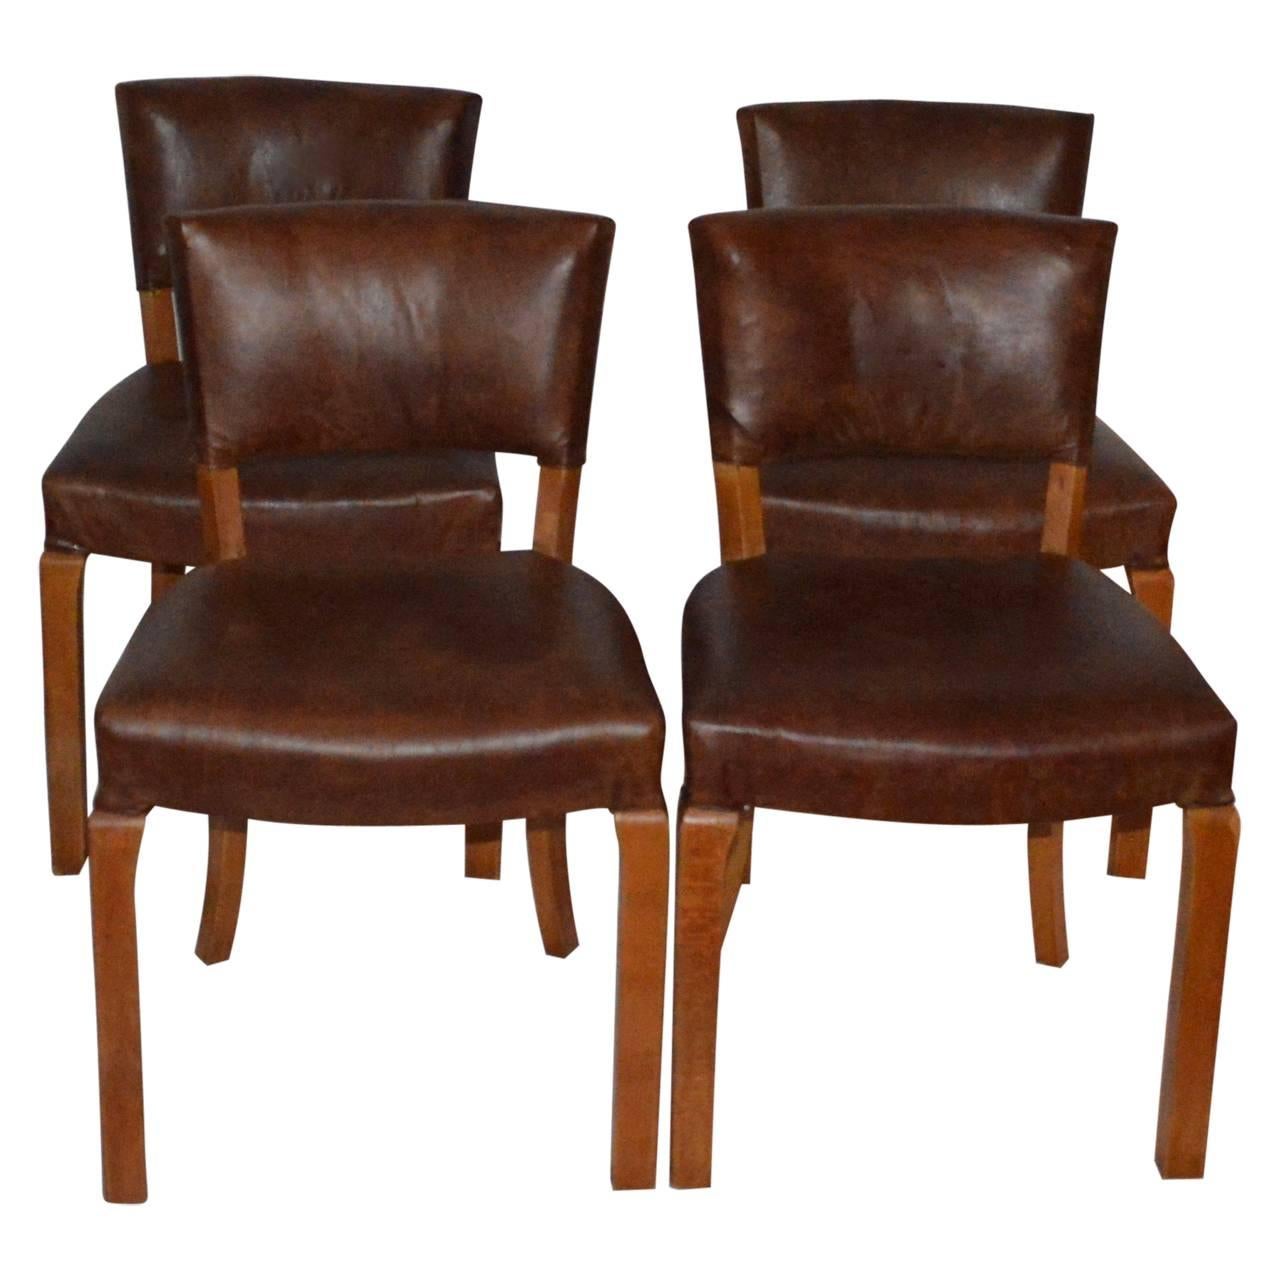 Mid-20th Century 20th Century Art Deco Leather Dining Chairs